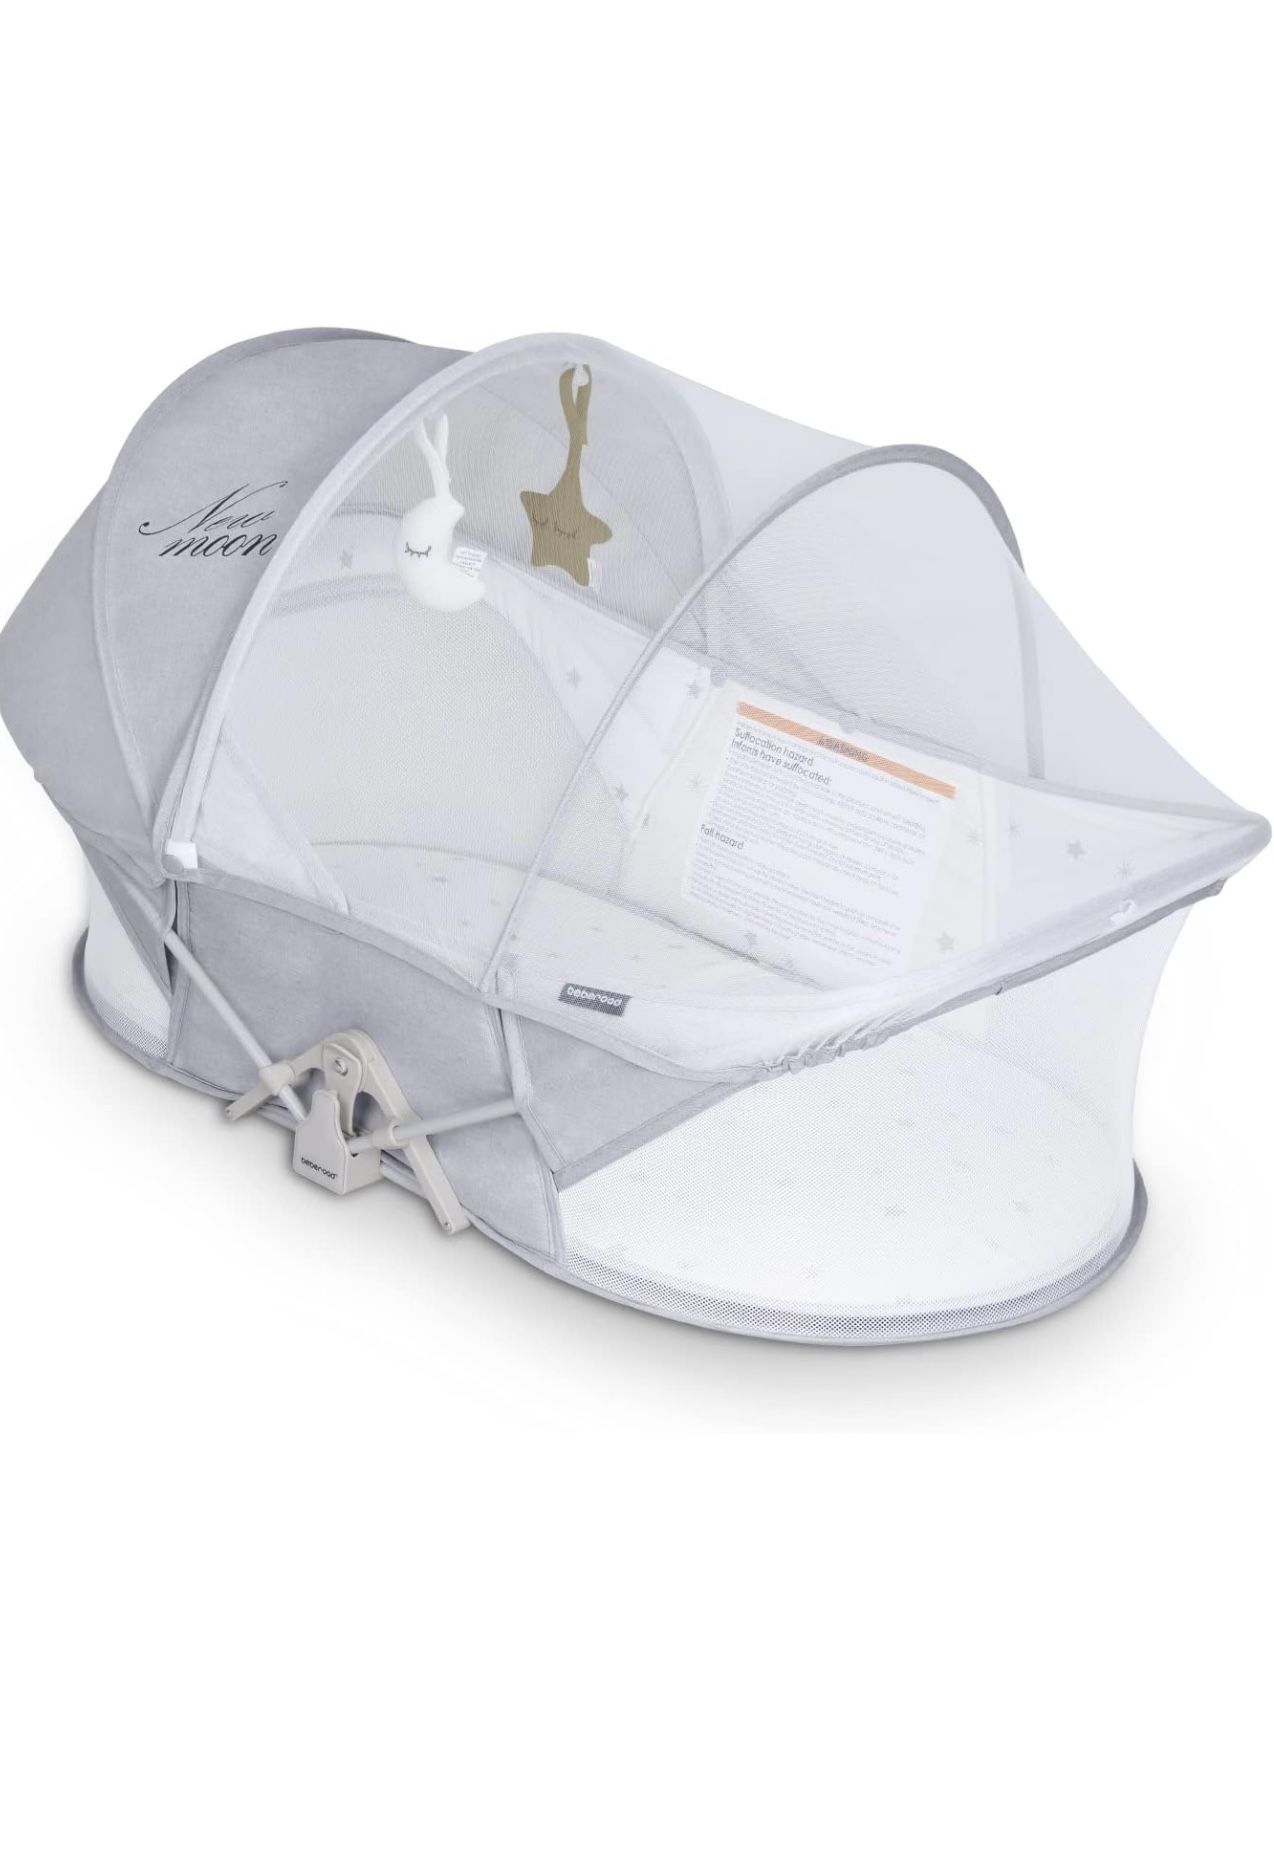 Beberoad Love Baby Travel Bassinet Portable Bassinet-Folding Portable Baby Bed Baby Bassinet in Bed Mini Travel Crib Infant Travel Bed with Mosquito N